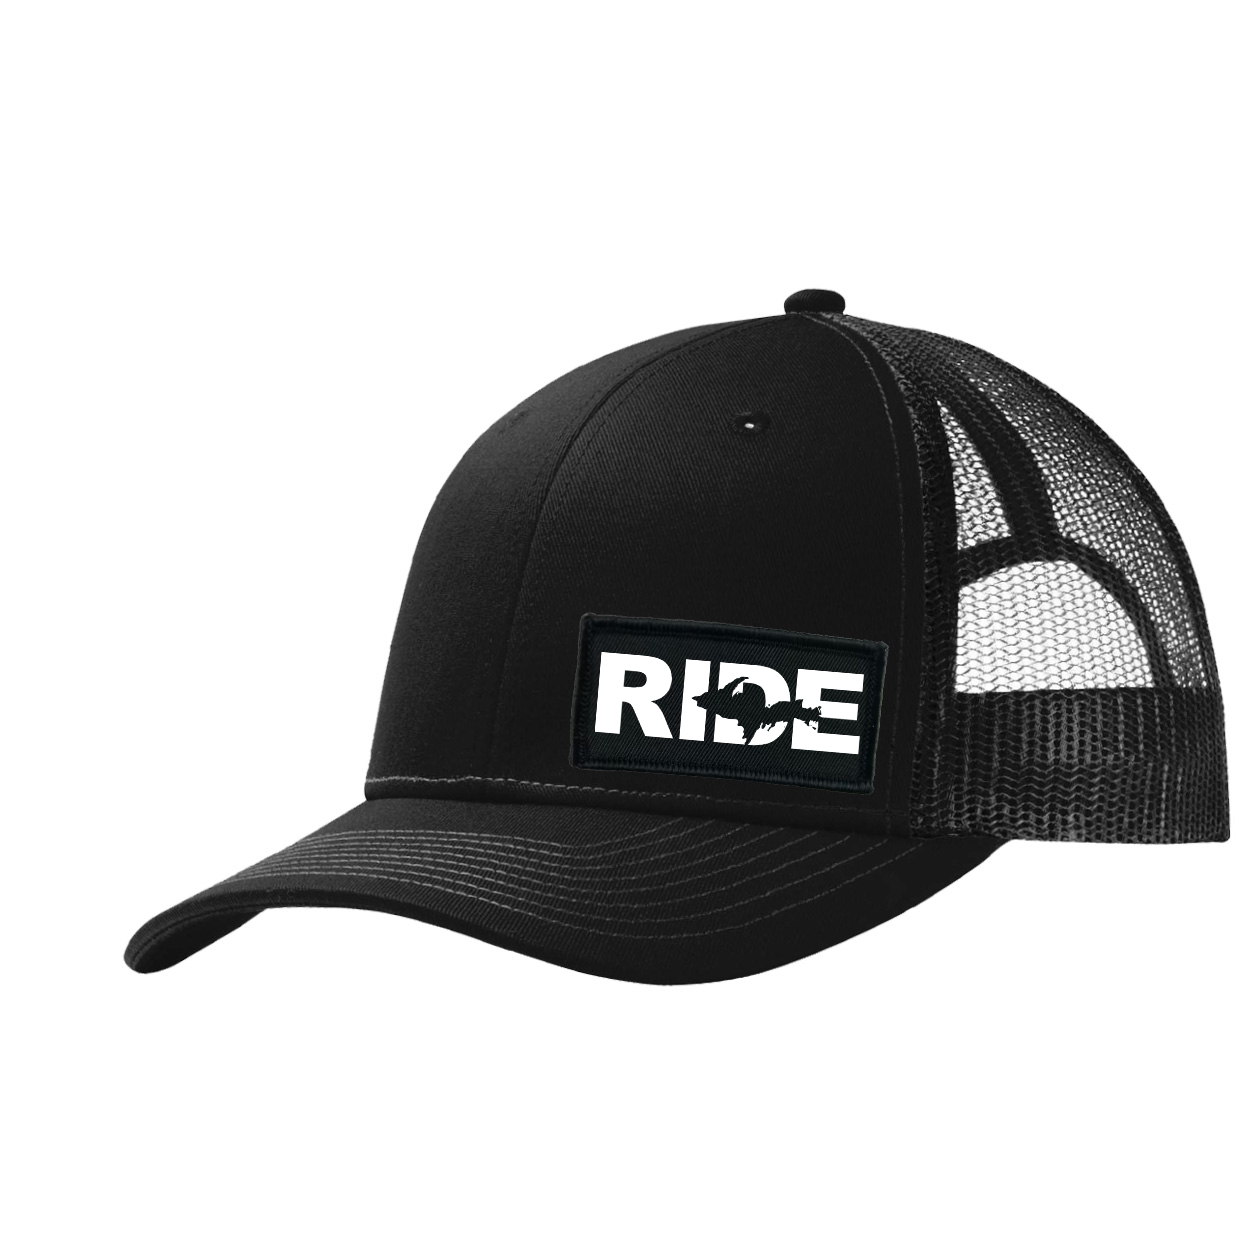 Ride Michigan UP Night Out Woven Patch Snapback Trucker Hat Black (White Logo)